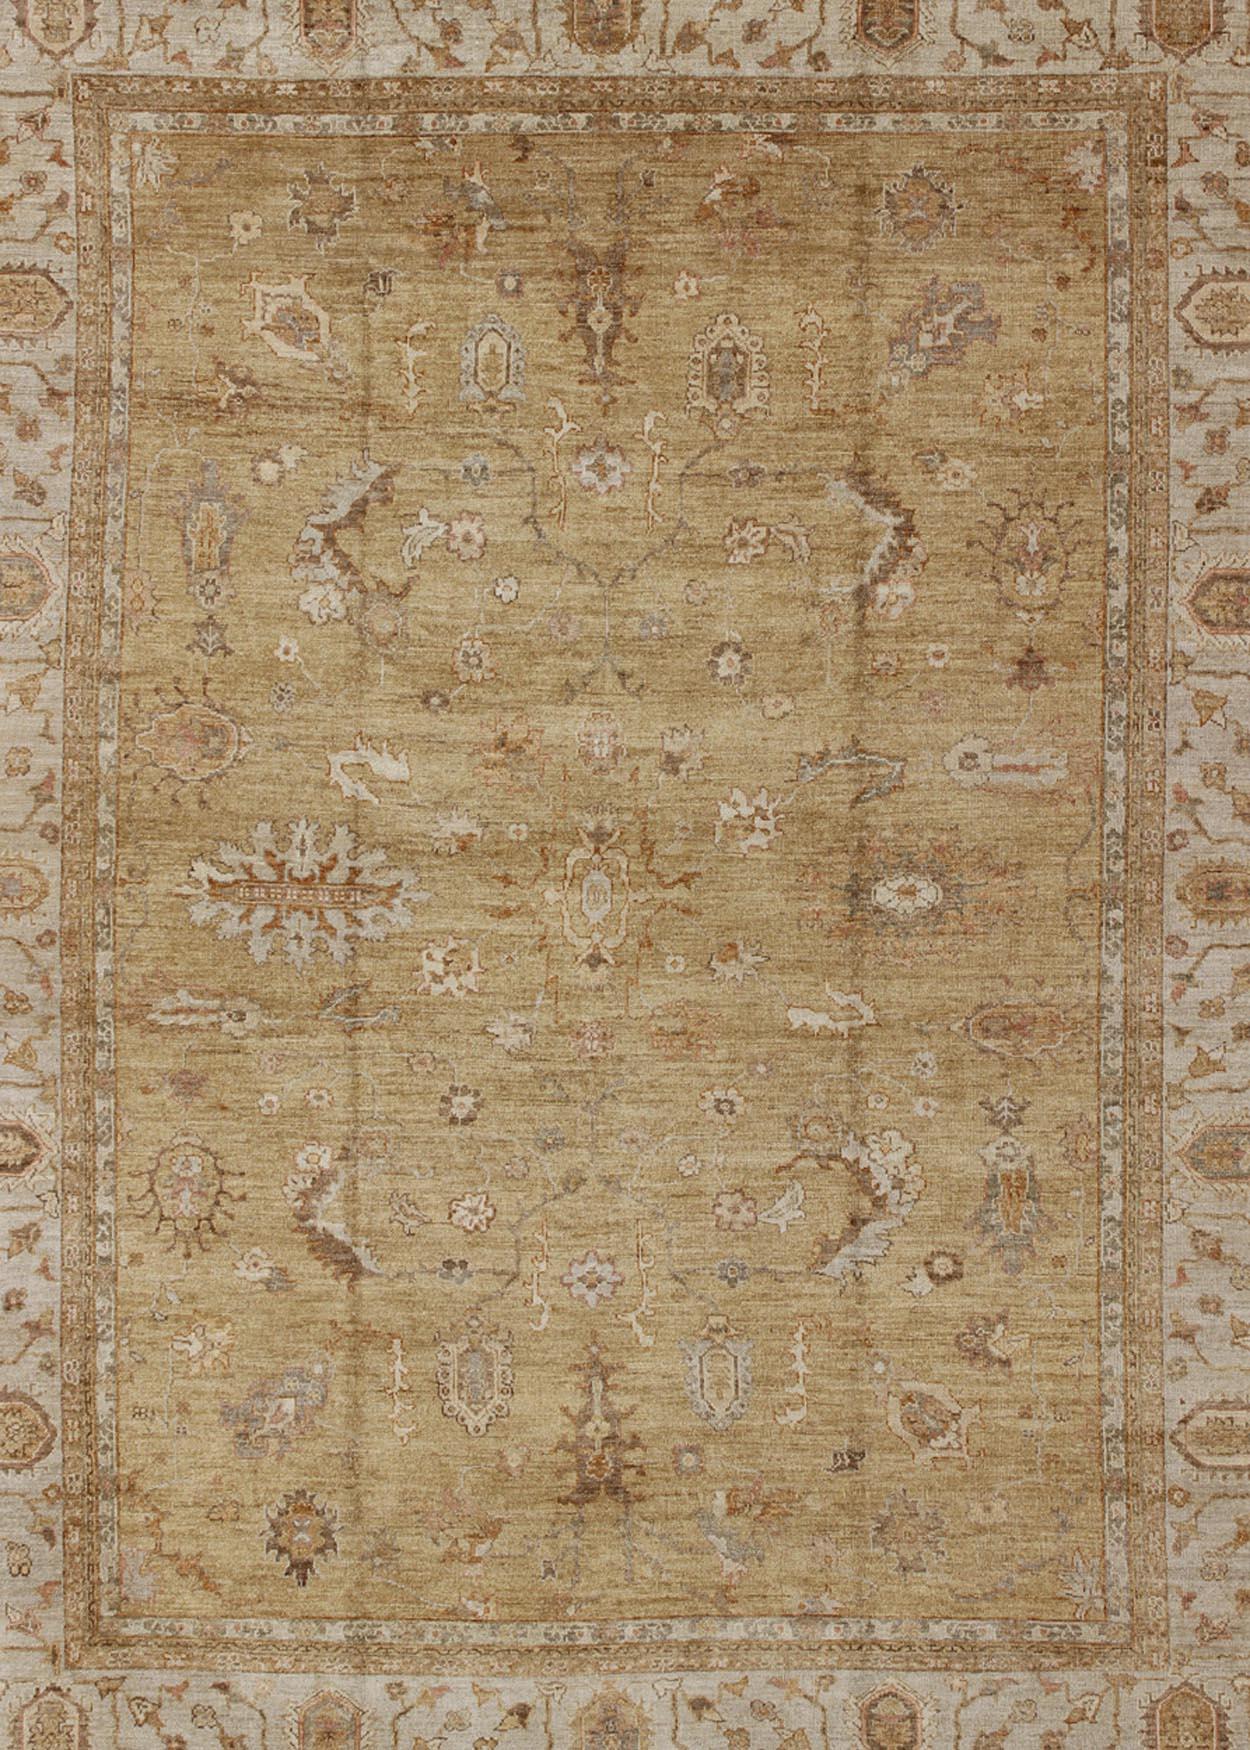 Hand-Knotted Large Angora Oushak Turkish Rug in Warm Colors of Taupe, Soft Gold, Brown, Cream For Sale